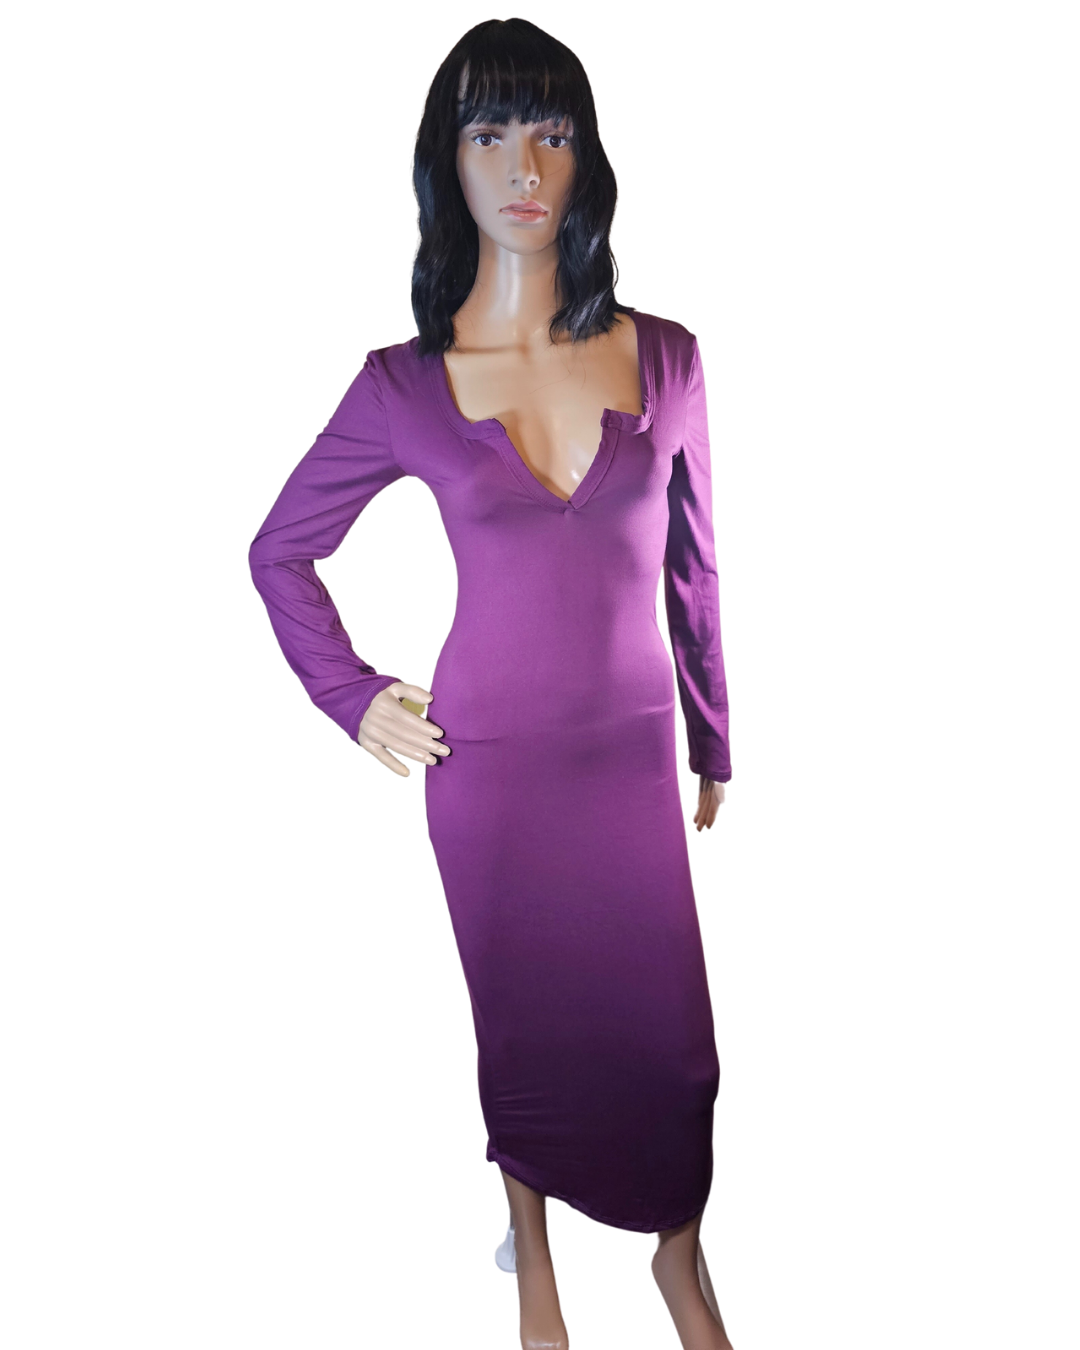 small-large, purple soft material dress that fits your curves and has a v-neck in the front. the dress goes pass your knees. long sleeves